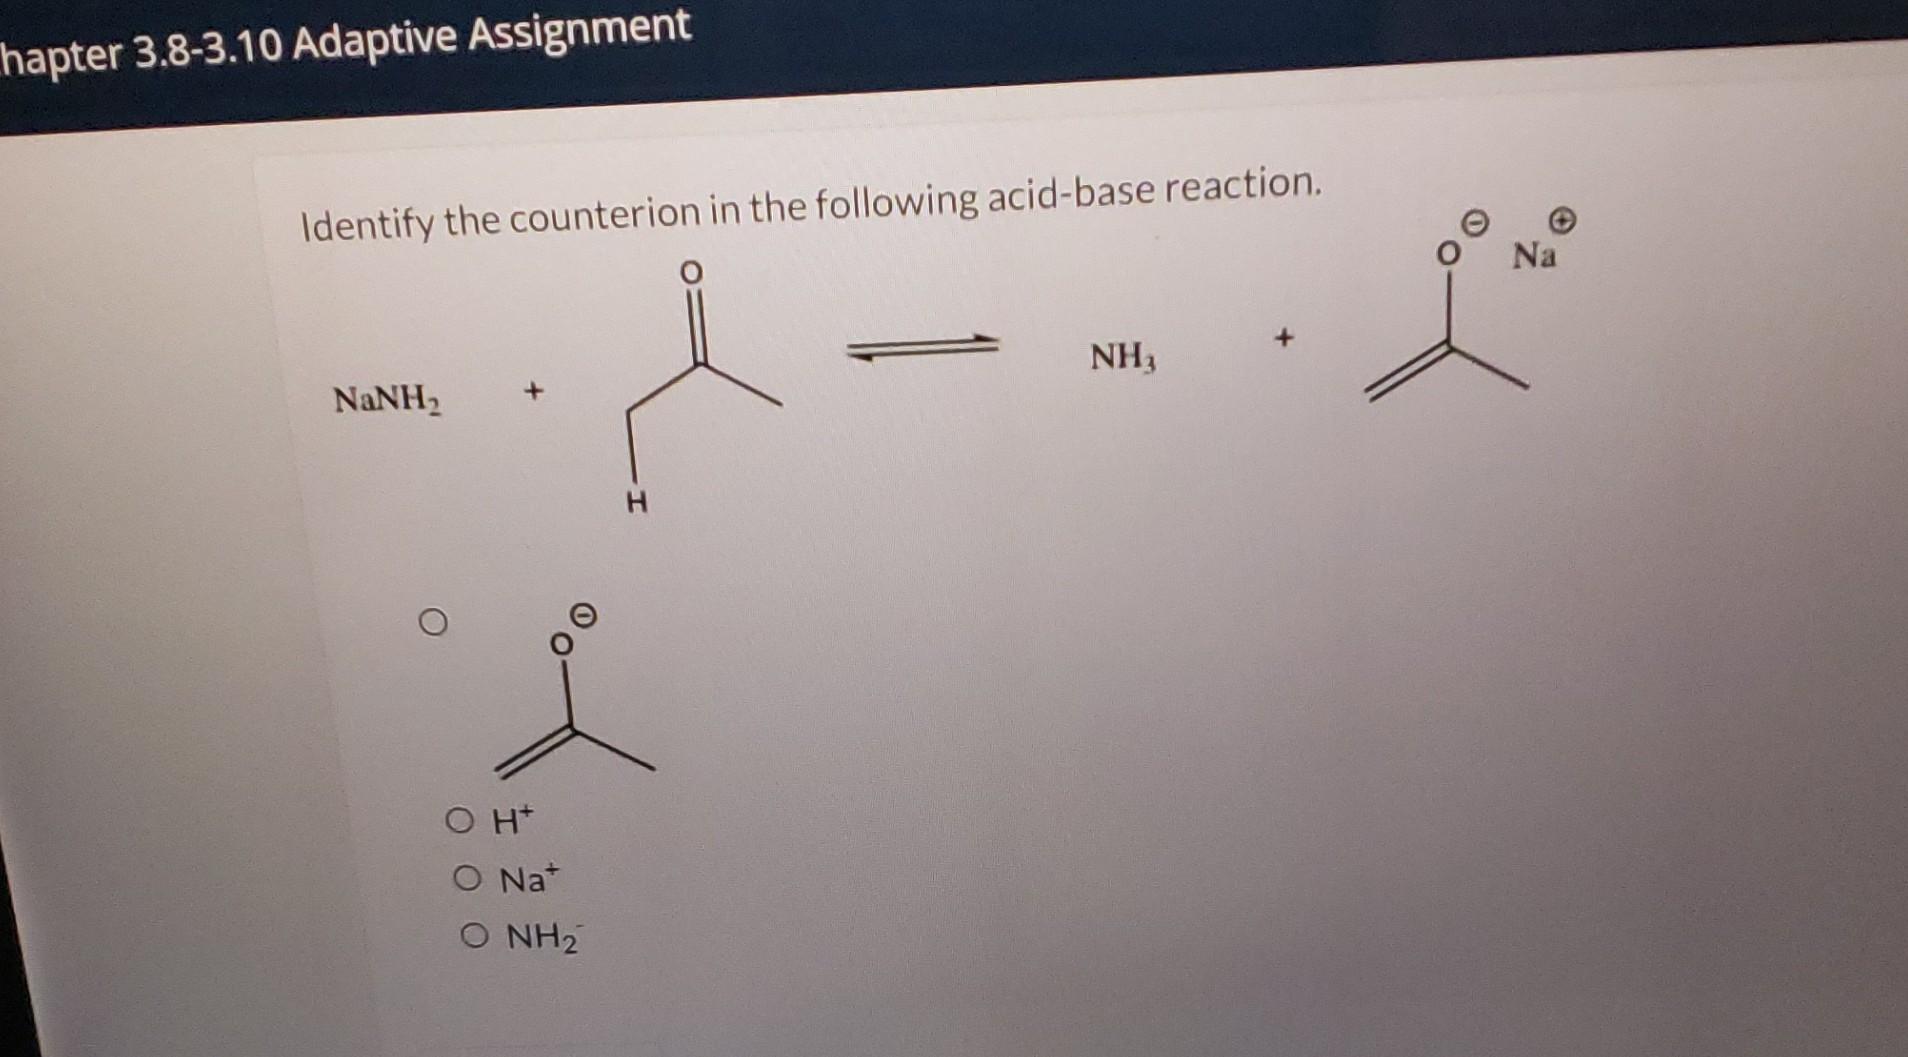 Solved Identify the counterion in the following acid-base | Chegg.com